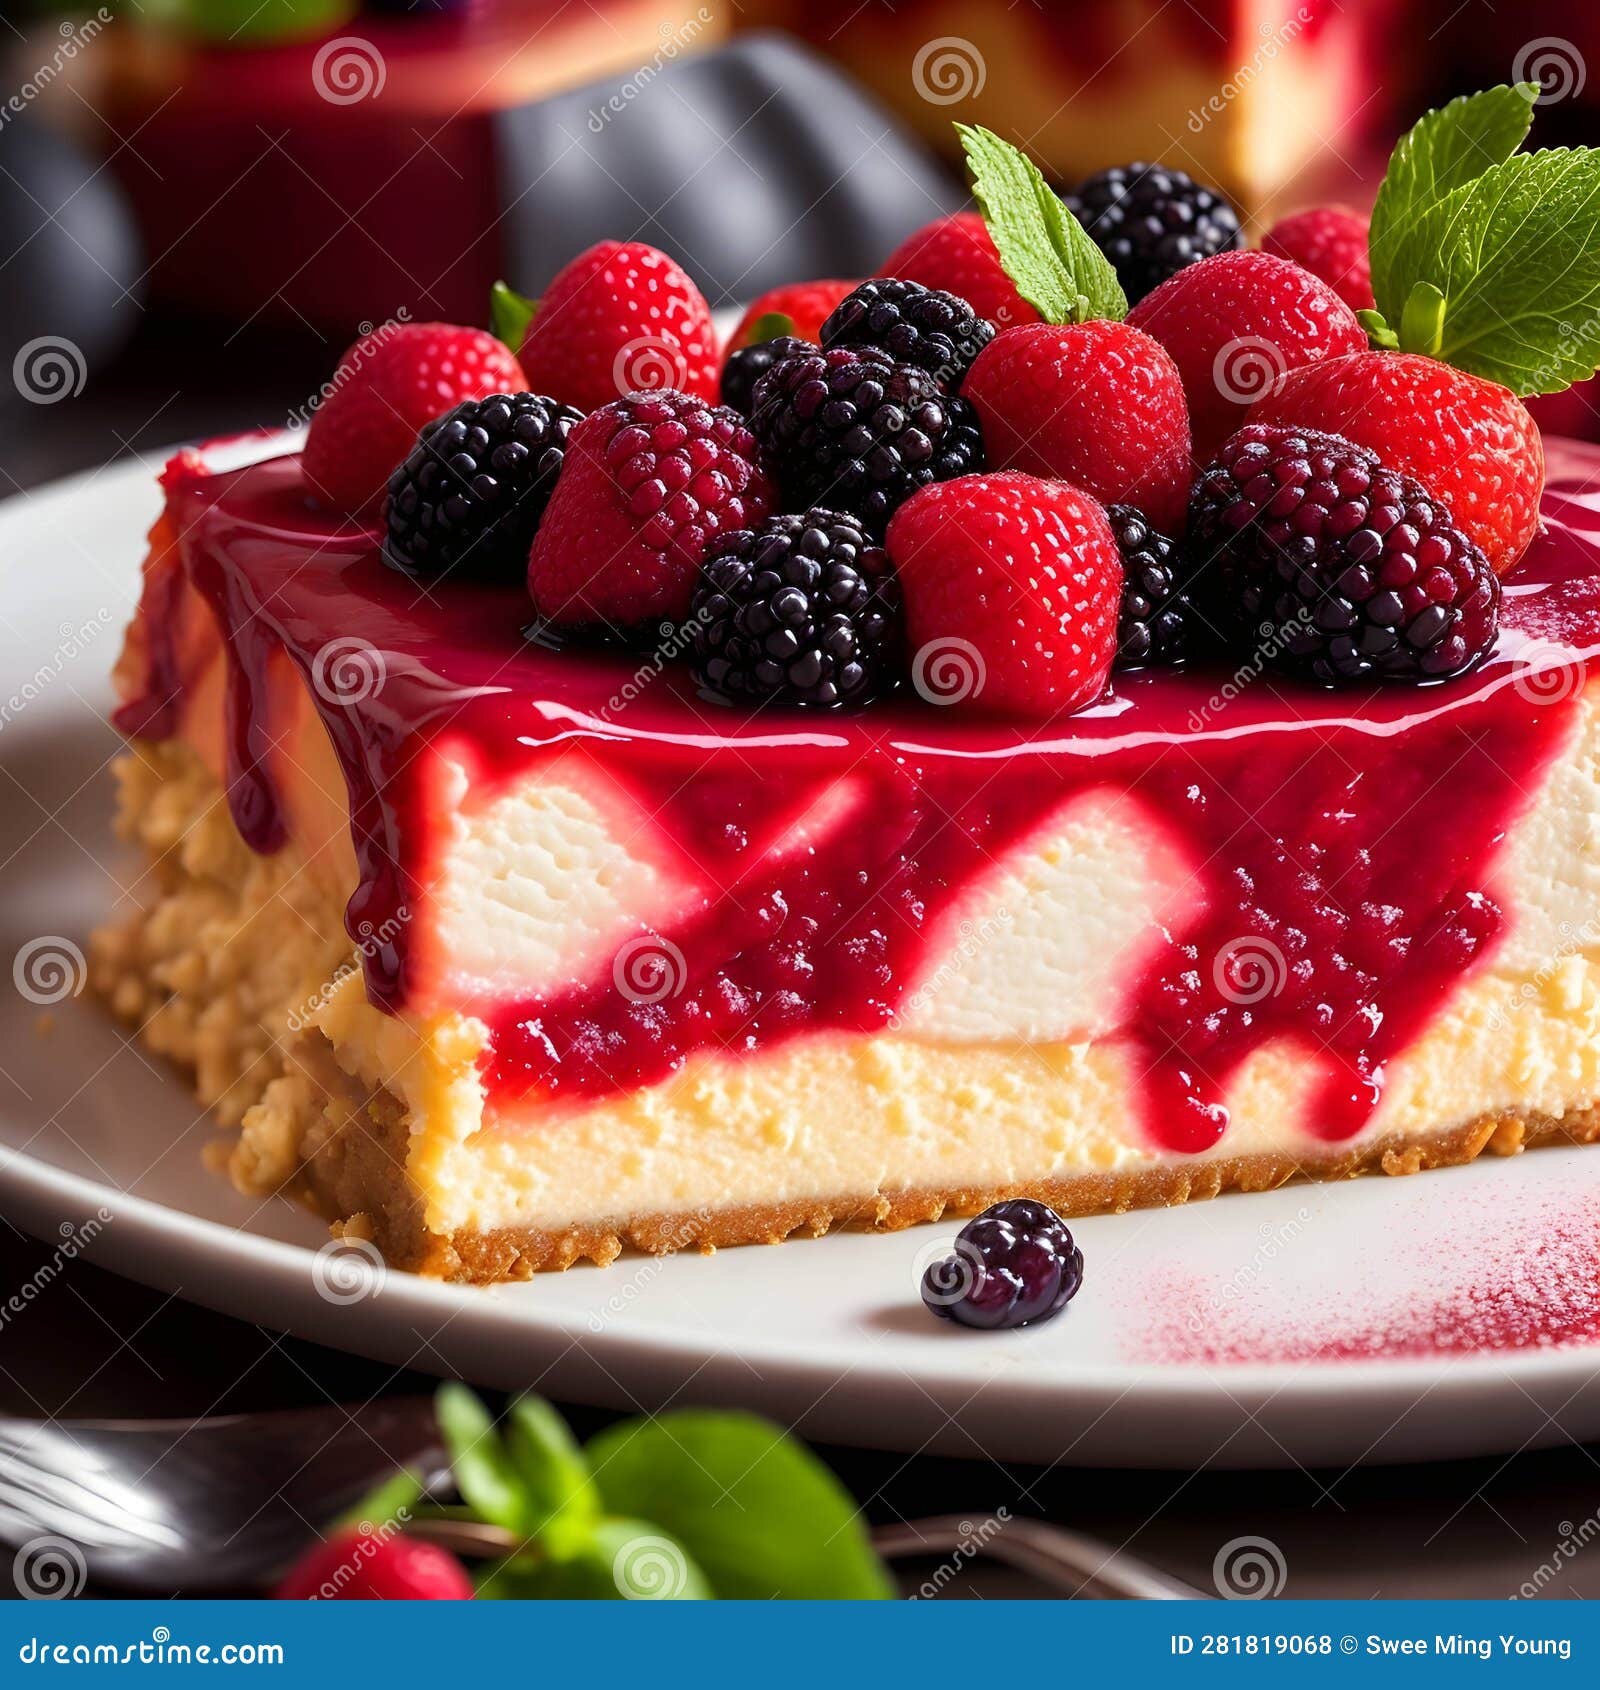 Painterly Image of the Culinary Delicious Cheese Cake with Fruits ...